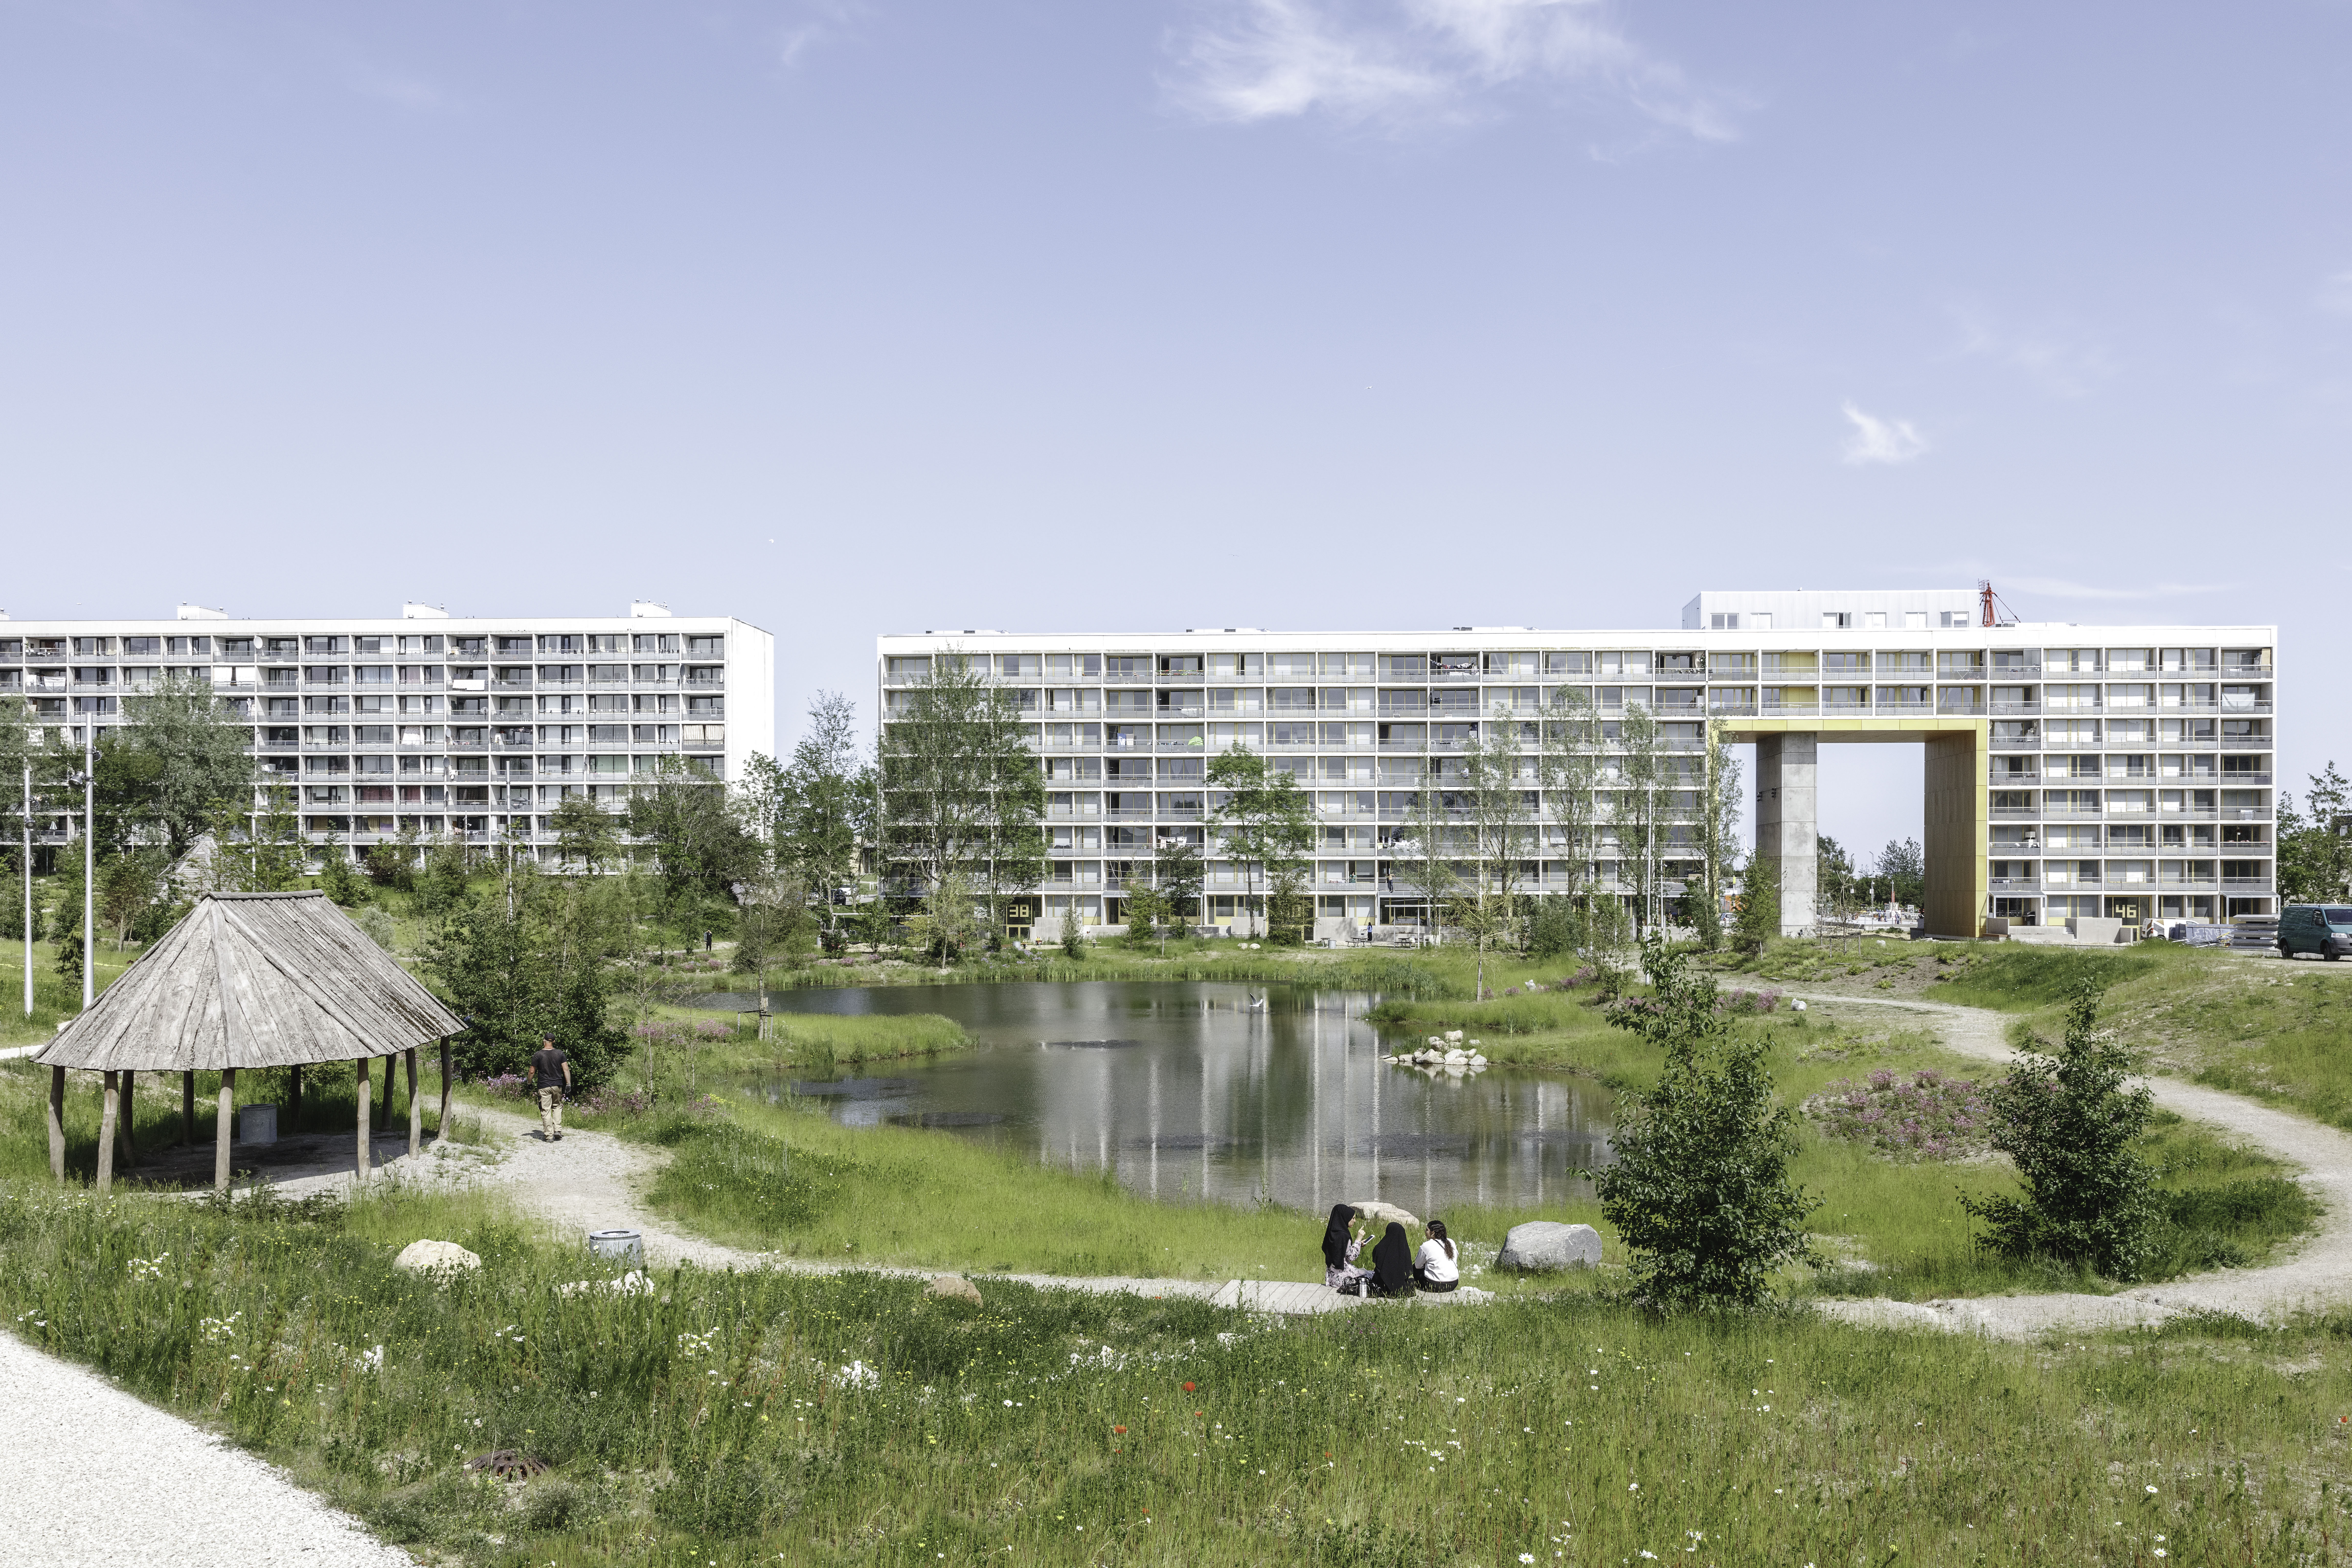 Transforming social housing with nature